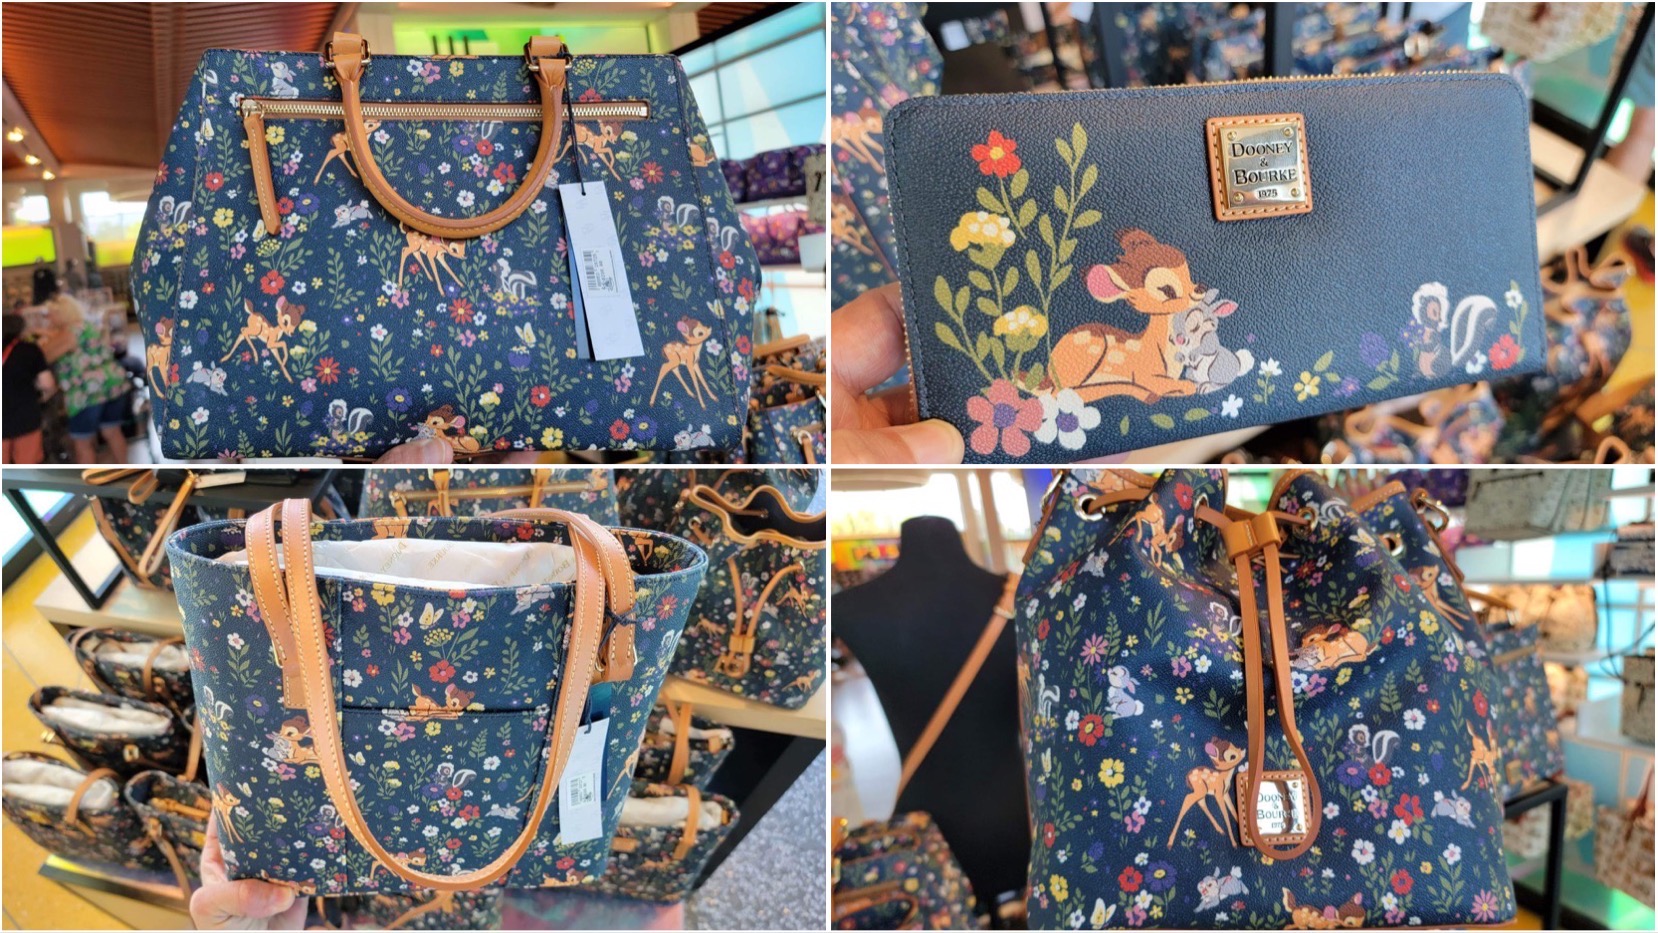 New Bambi Dooney And Bourke Collection Spotted At Walt Disney World!